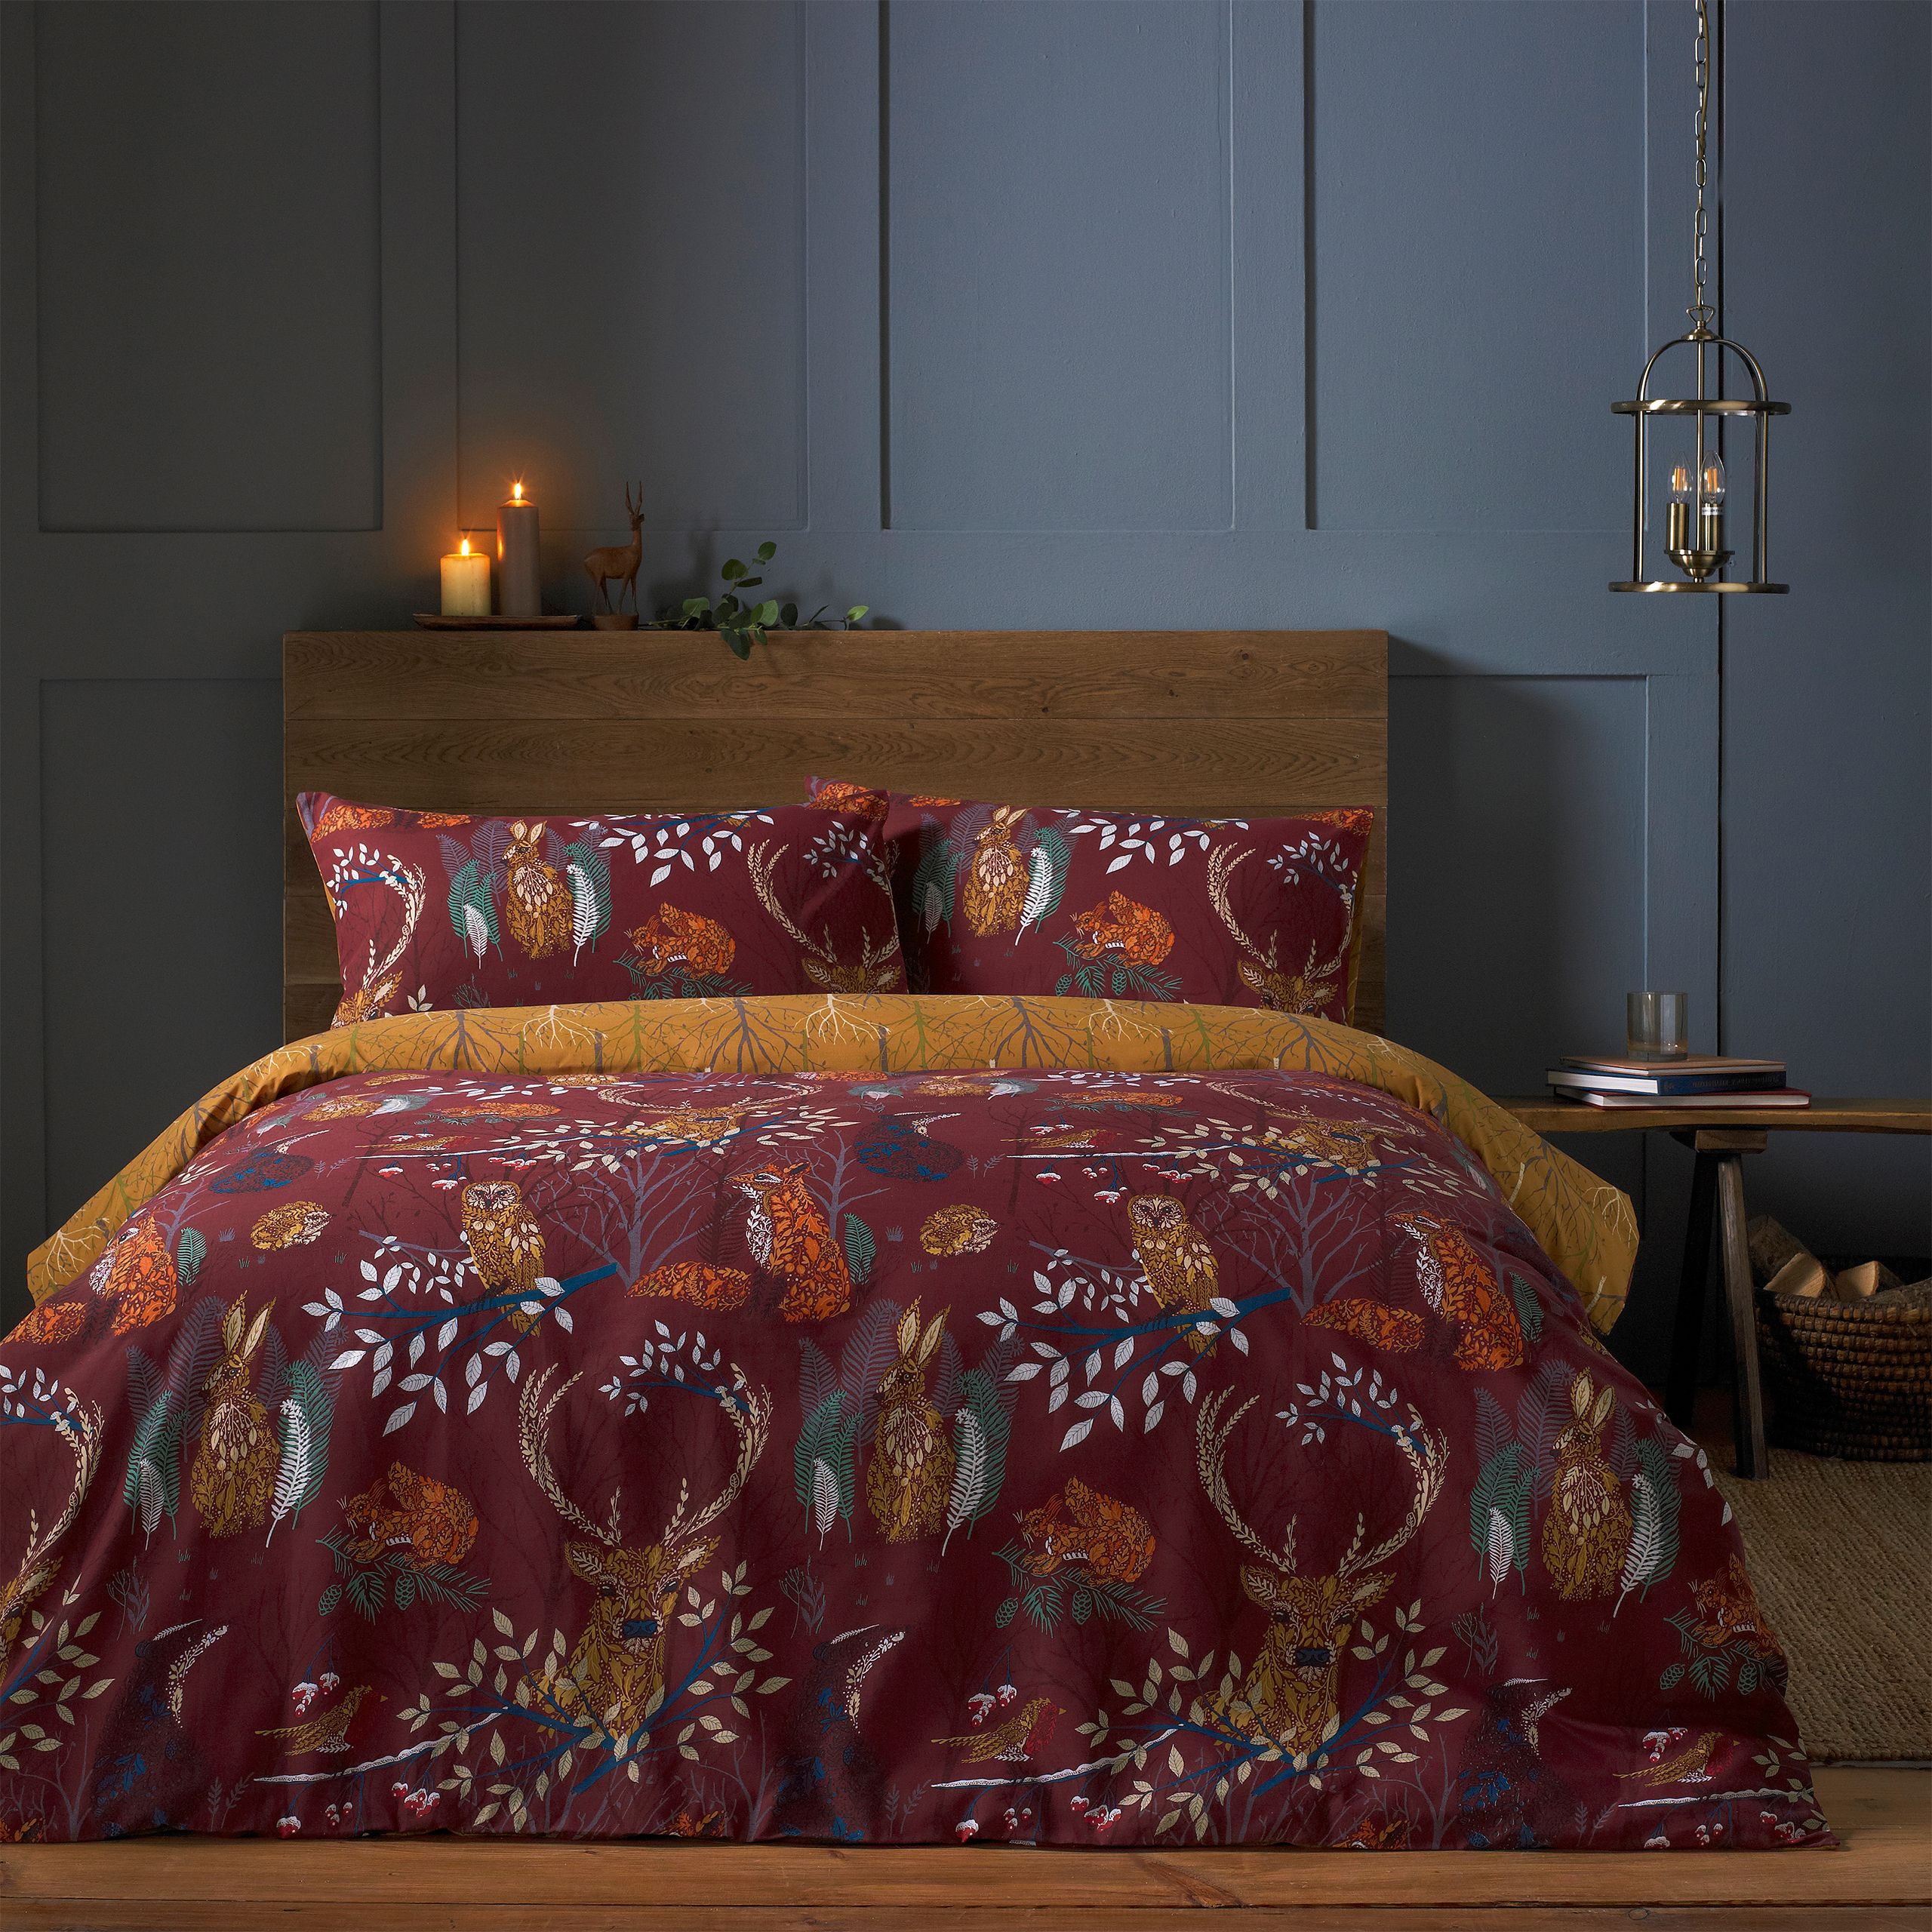 The Forest Fauna Duvet Cover Set features a hand-drawn and painted decorative print capturing the magic of nature. Inspired by the colours of the leaves throughout the year and Woodland animals; the bedding design is complete with a reversible design, clear button closure and easy care properties.
Measurements are as below for each size in this range;
Single: 137 x 200cm (includes one matching pillowcase)
Double: 200 200cm (includes two matching pillowcases)
King: 230 x 220cm (includes two matching pillowcases)
Super King: 260 x 220cm (includes two matching pillowcases)